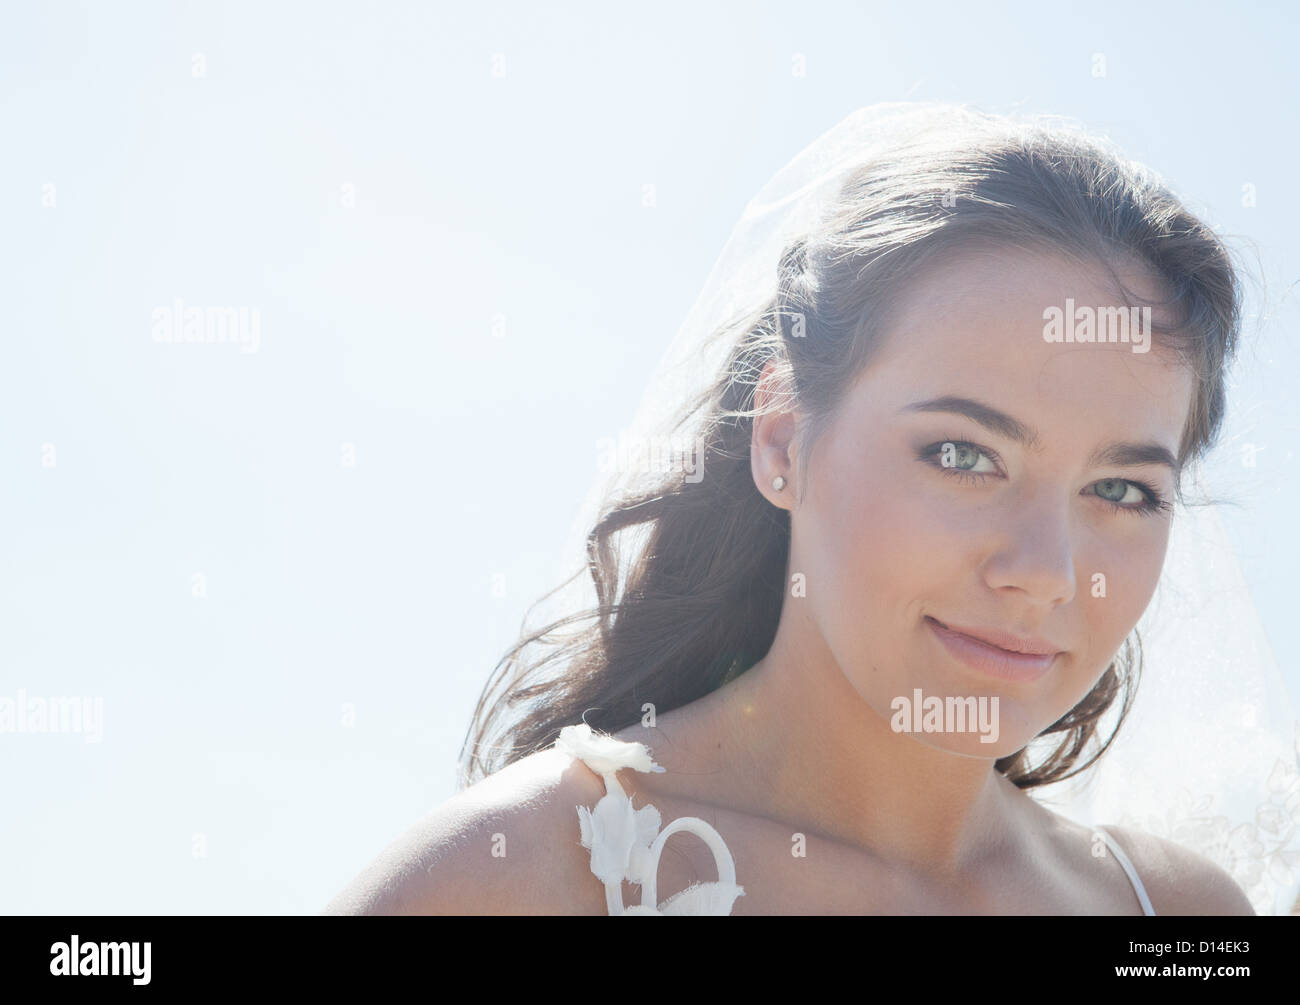 Smiling woman standing outdoors Banque D'Images